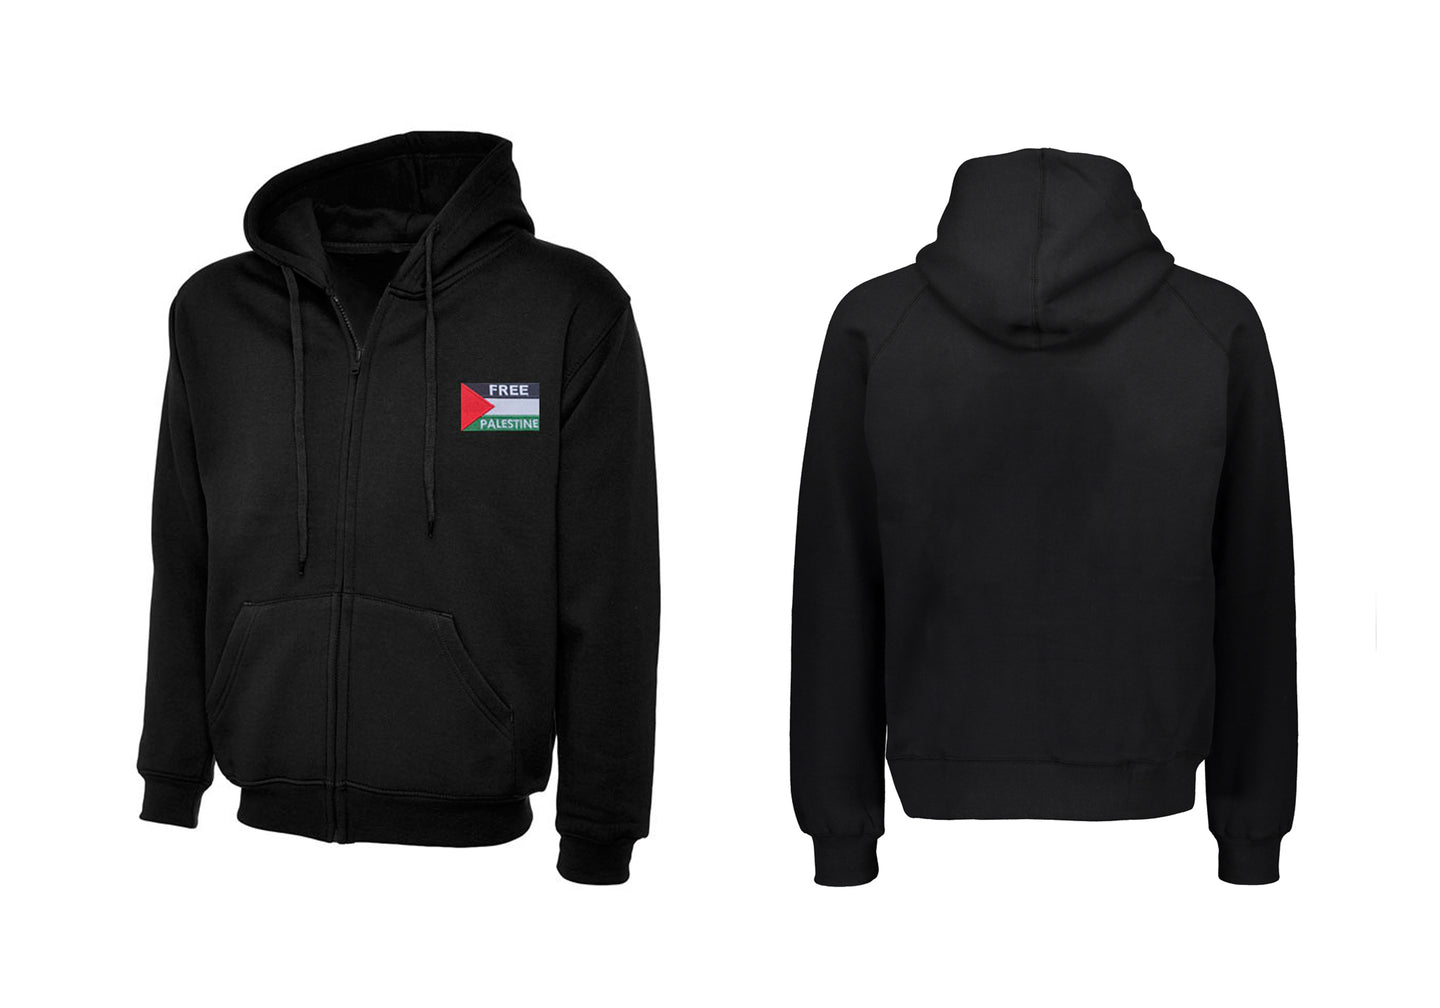 Zip Hoodie With Free Palestine Embroidered Flag Patch